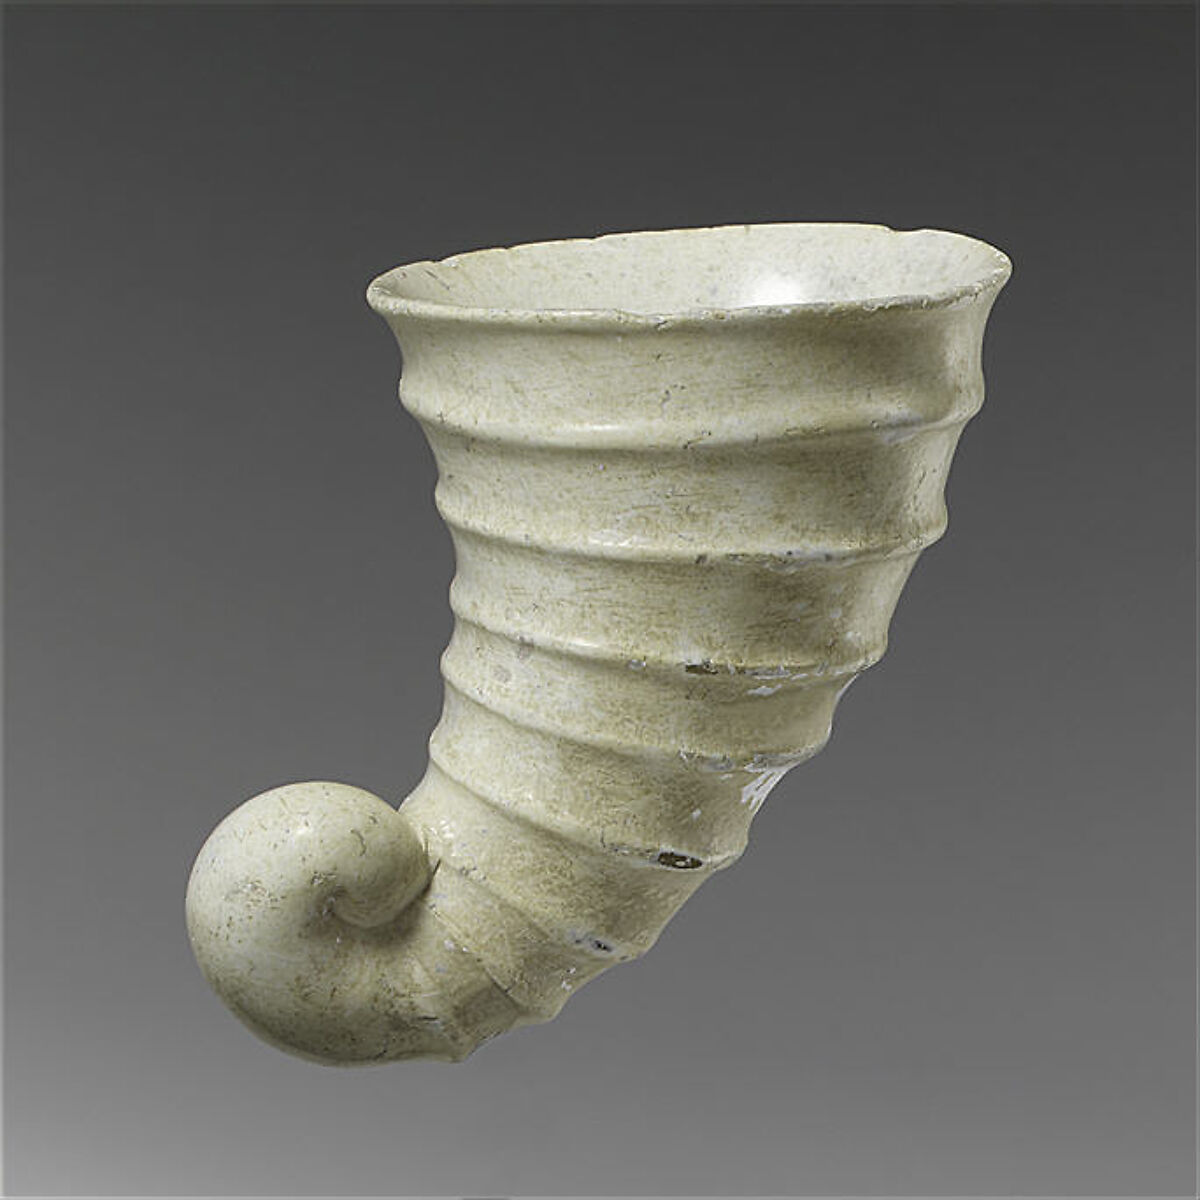 Vessel in the Form of a Horn, Stone, Vietnam (Sa Huynh culture?) 